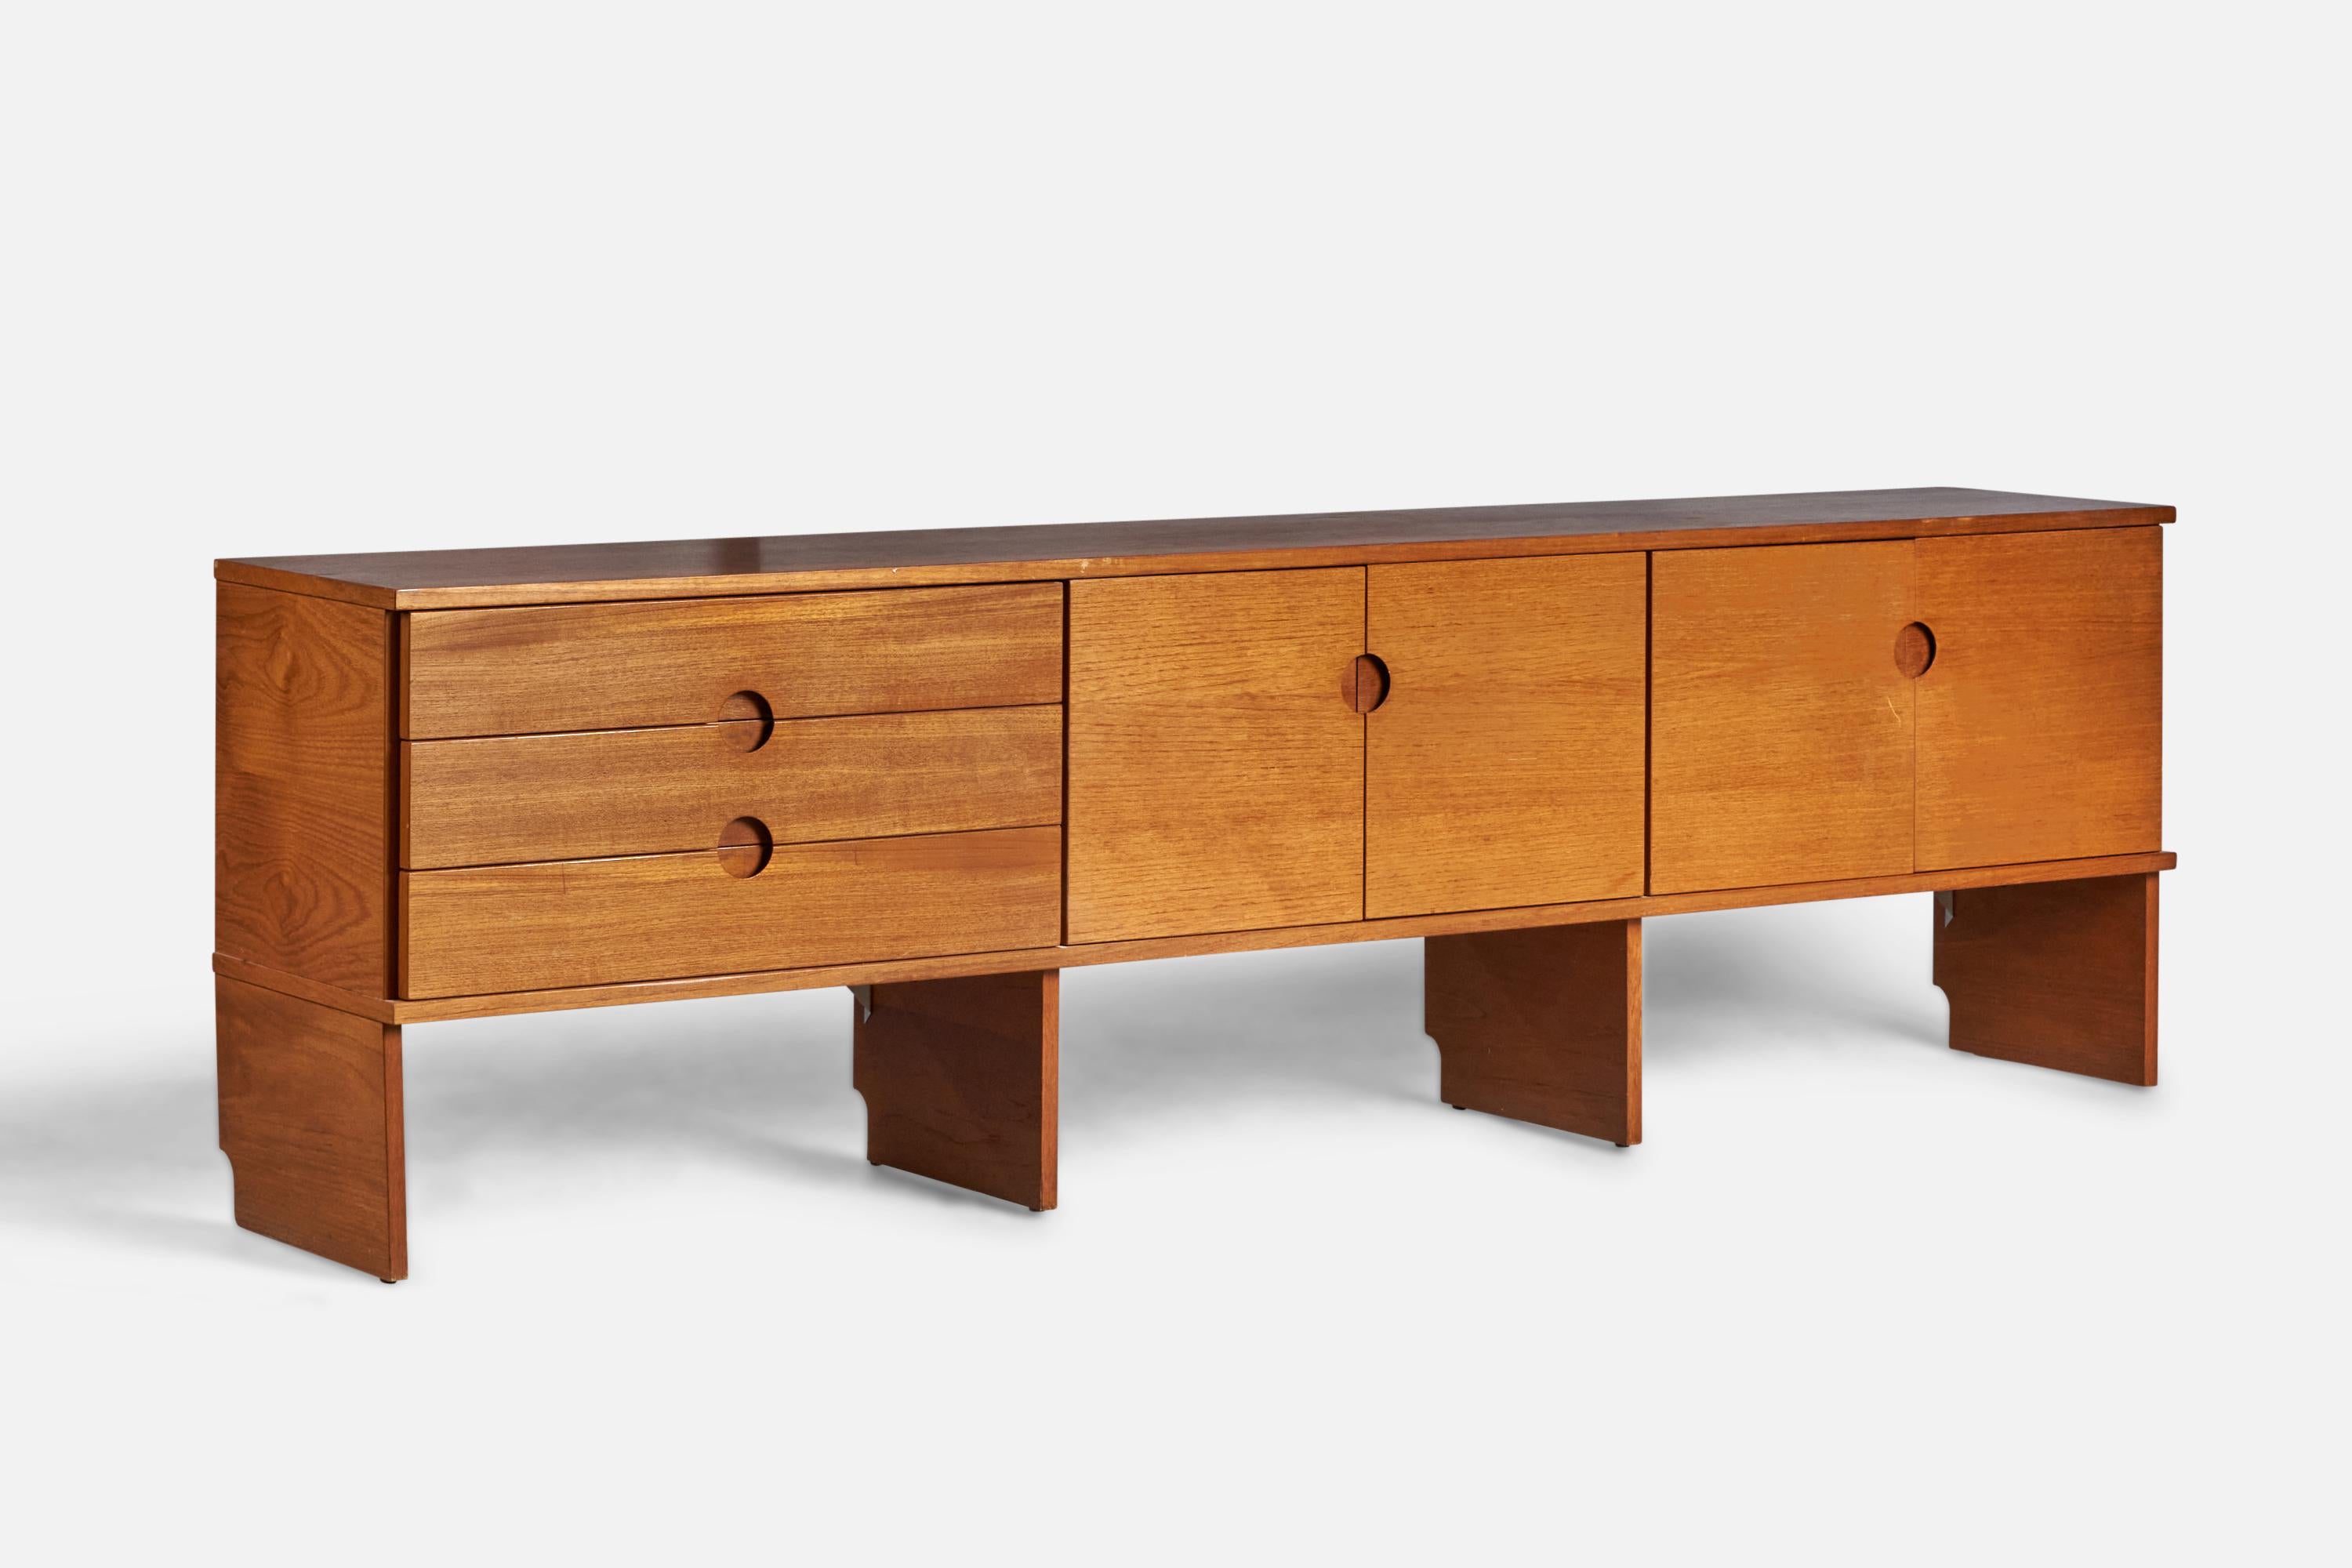 A teak console designed by Pertti Salmi and produced by Vilka, Finland, c. 1960s.